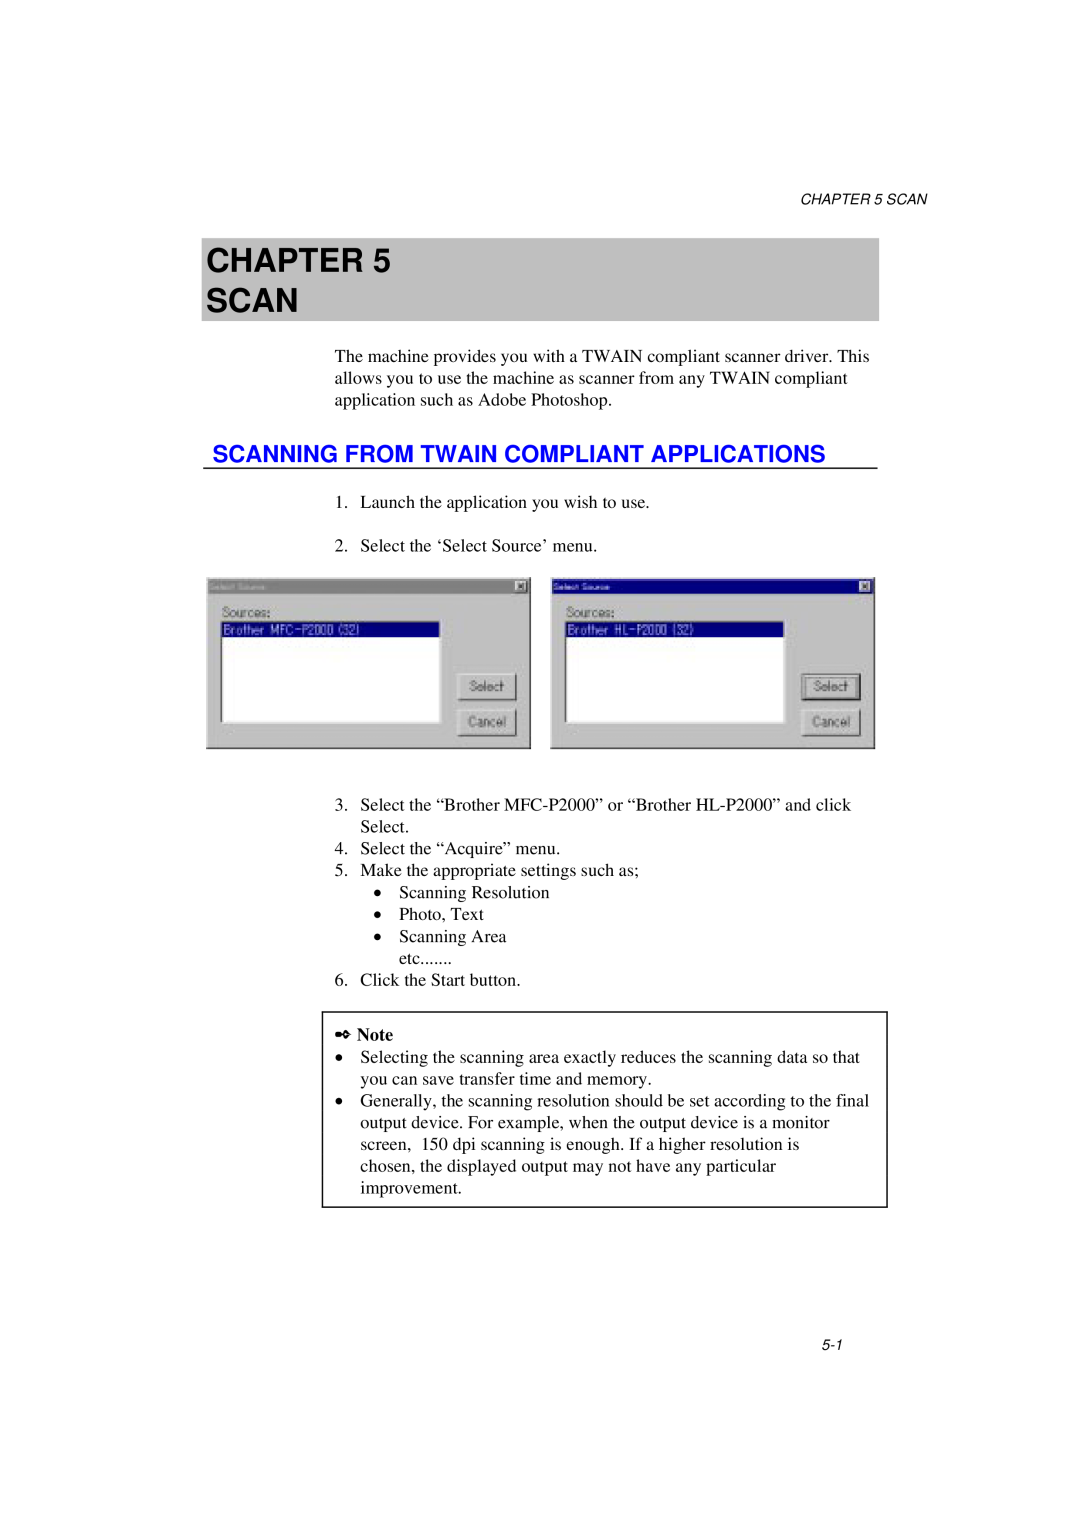 Brother MFC/HL-P2000 manual Chapter Scan, Scanning From Twain Compliant Applications 